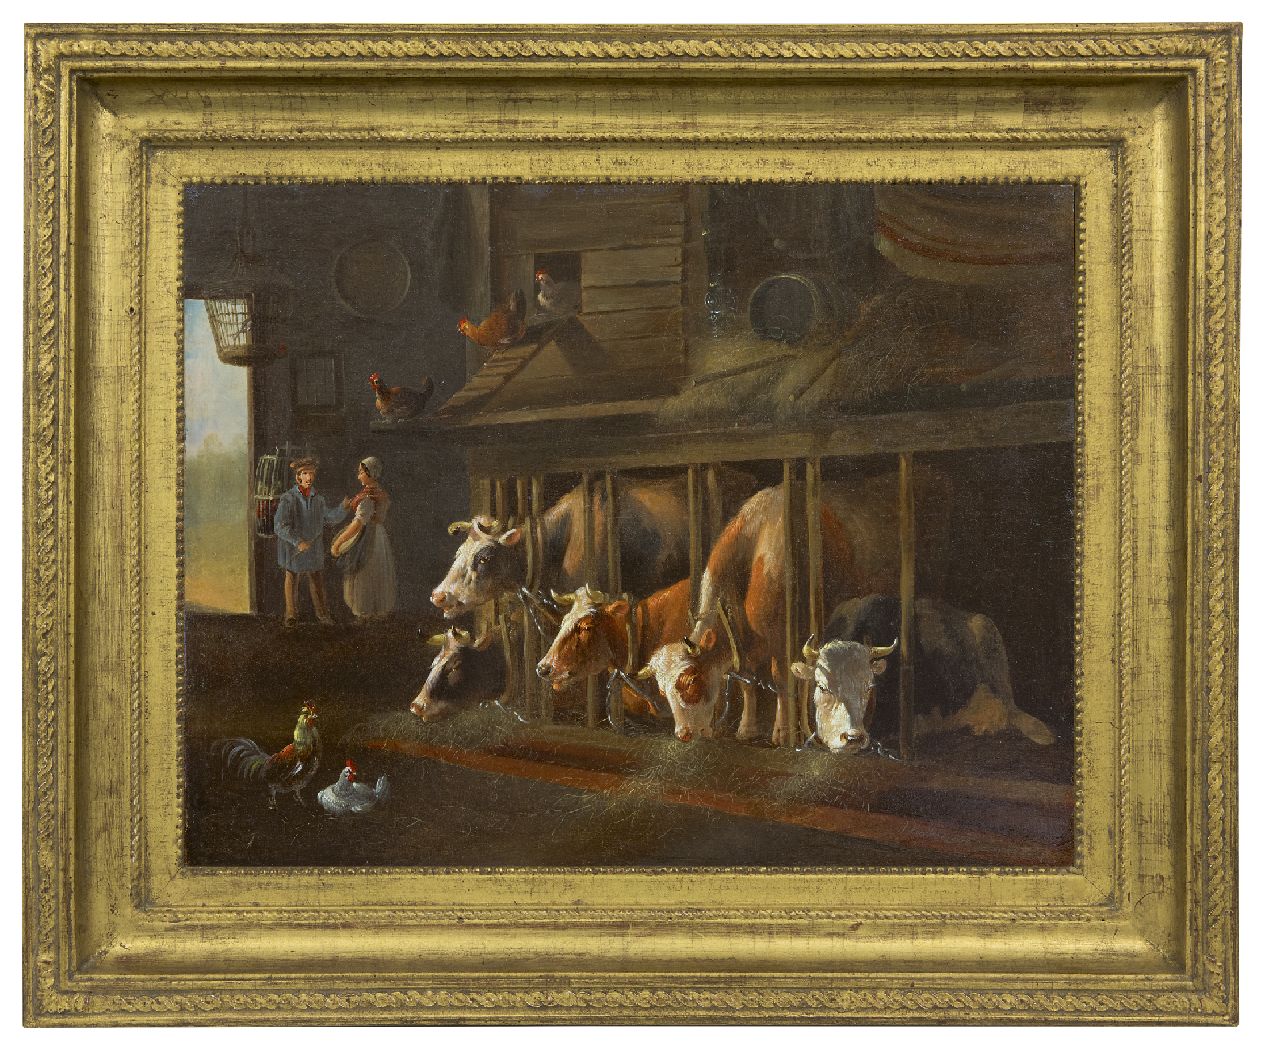 Verhoesen A.  | Albertus Verhoesen | Paintings offered for sale | A barn interior, oil on panel 36.7 x 47.6 cm, signed l.r.